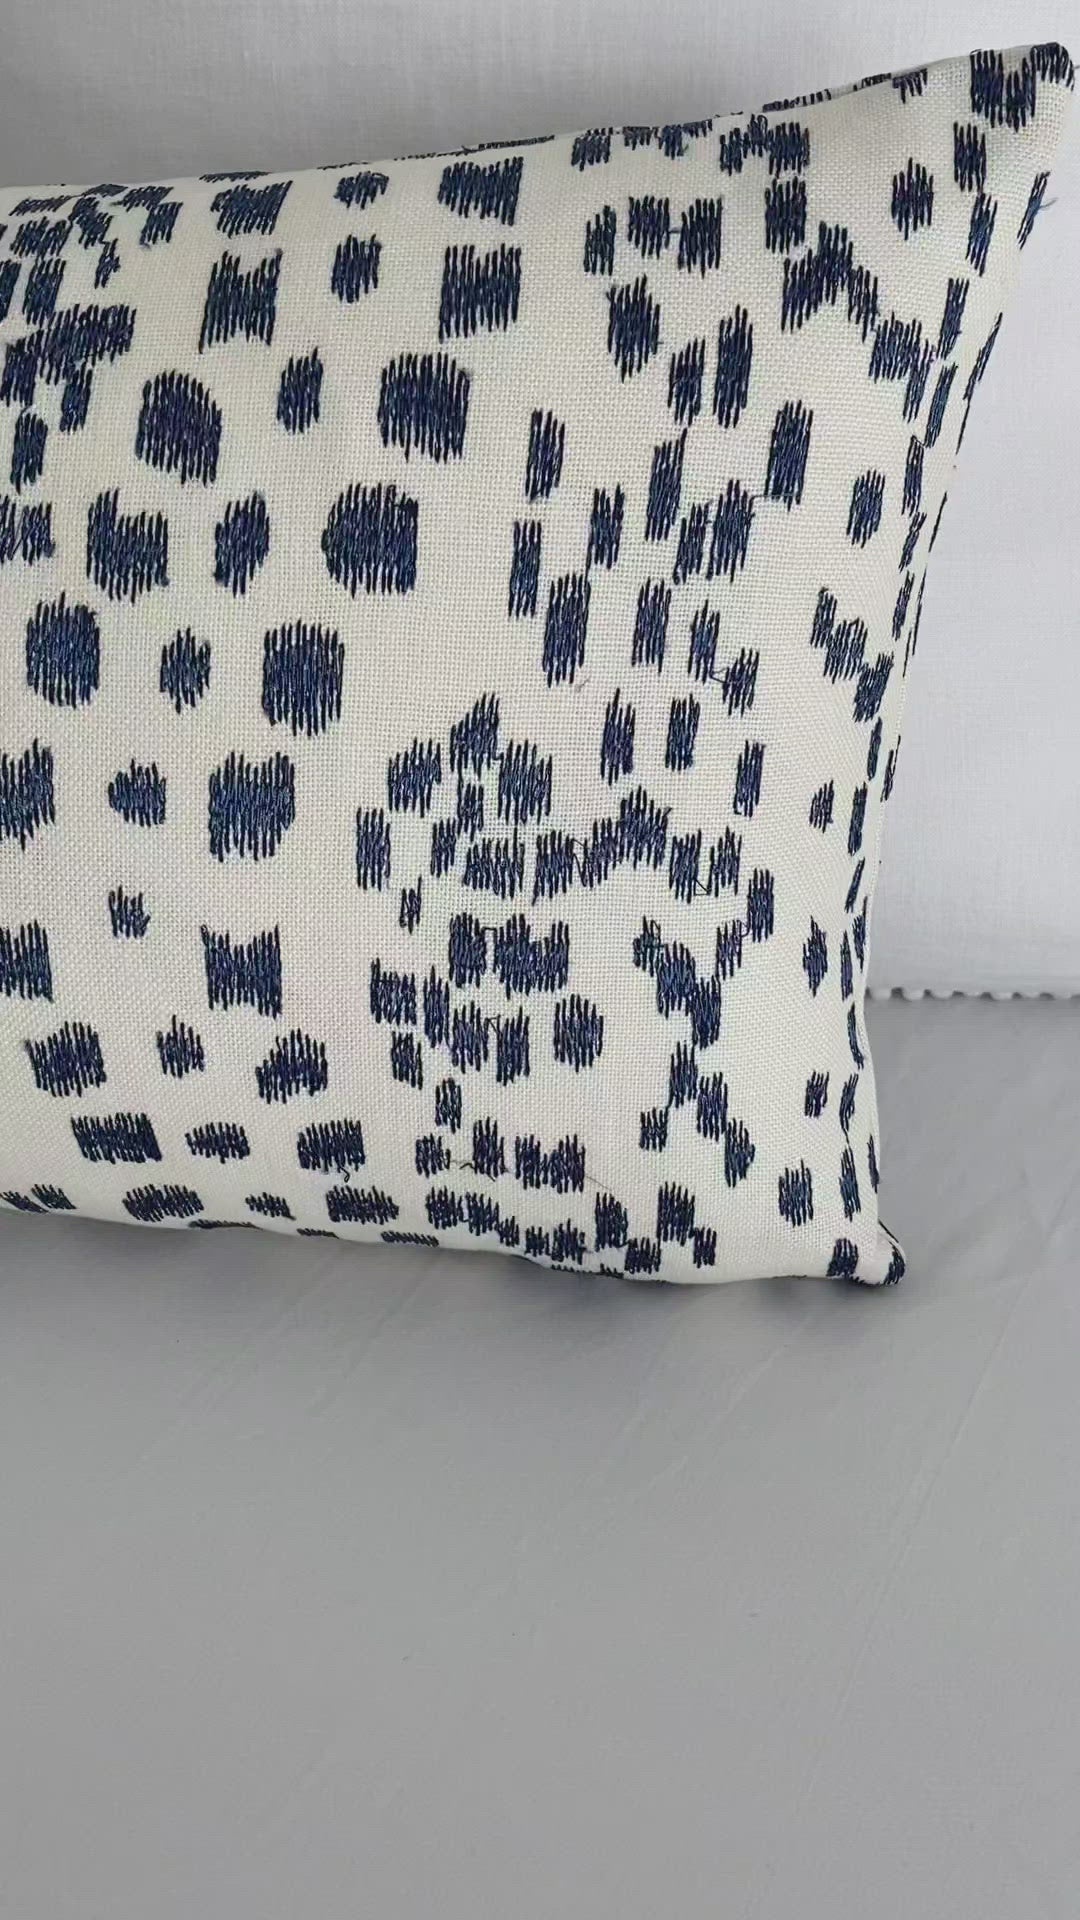 Brunschwig Fils Les Touches Embroidered Indigo Blue Luxury Designer Throw Pillow Cover Product Video